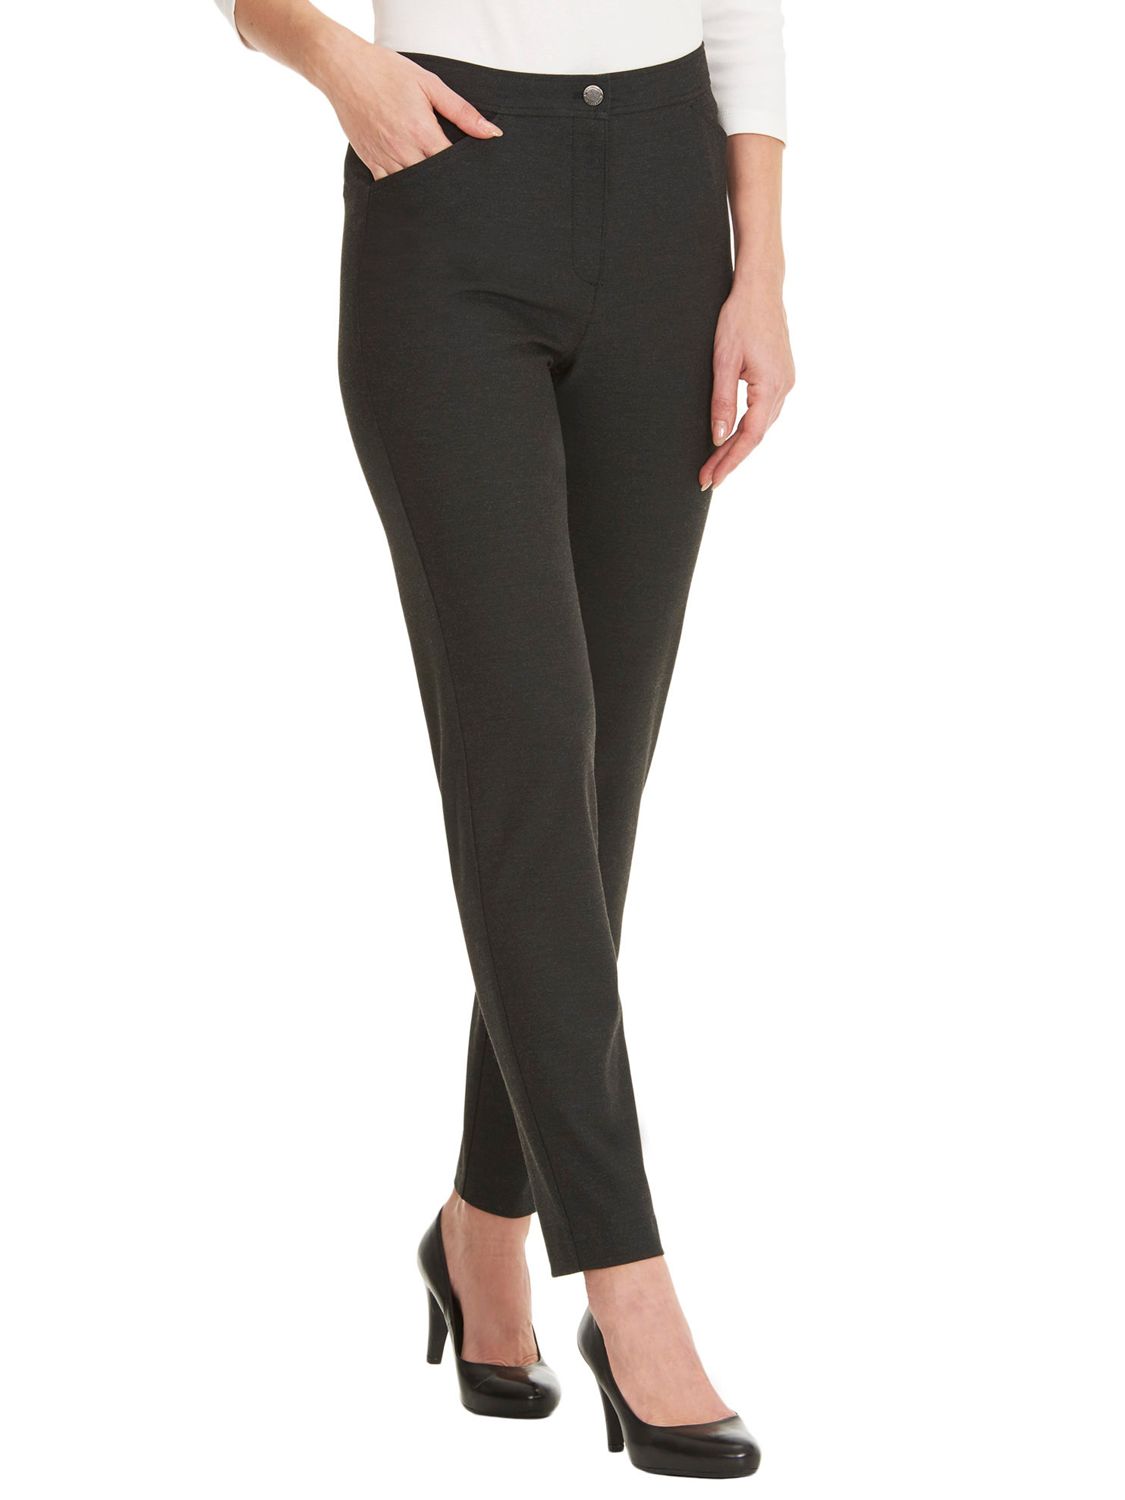 Betty Barclay Perfect Body Trousers at John Lewis